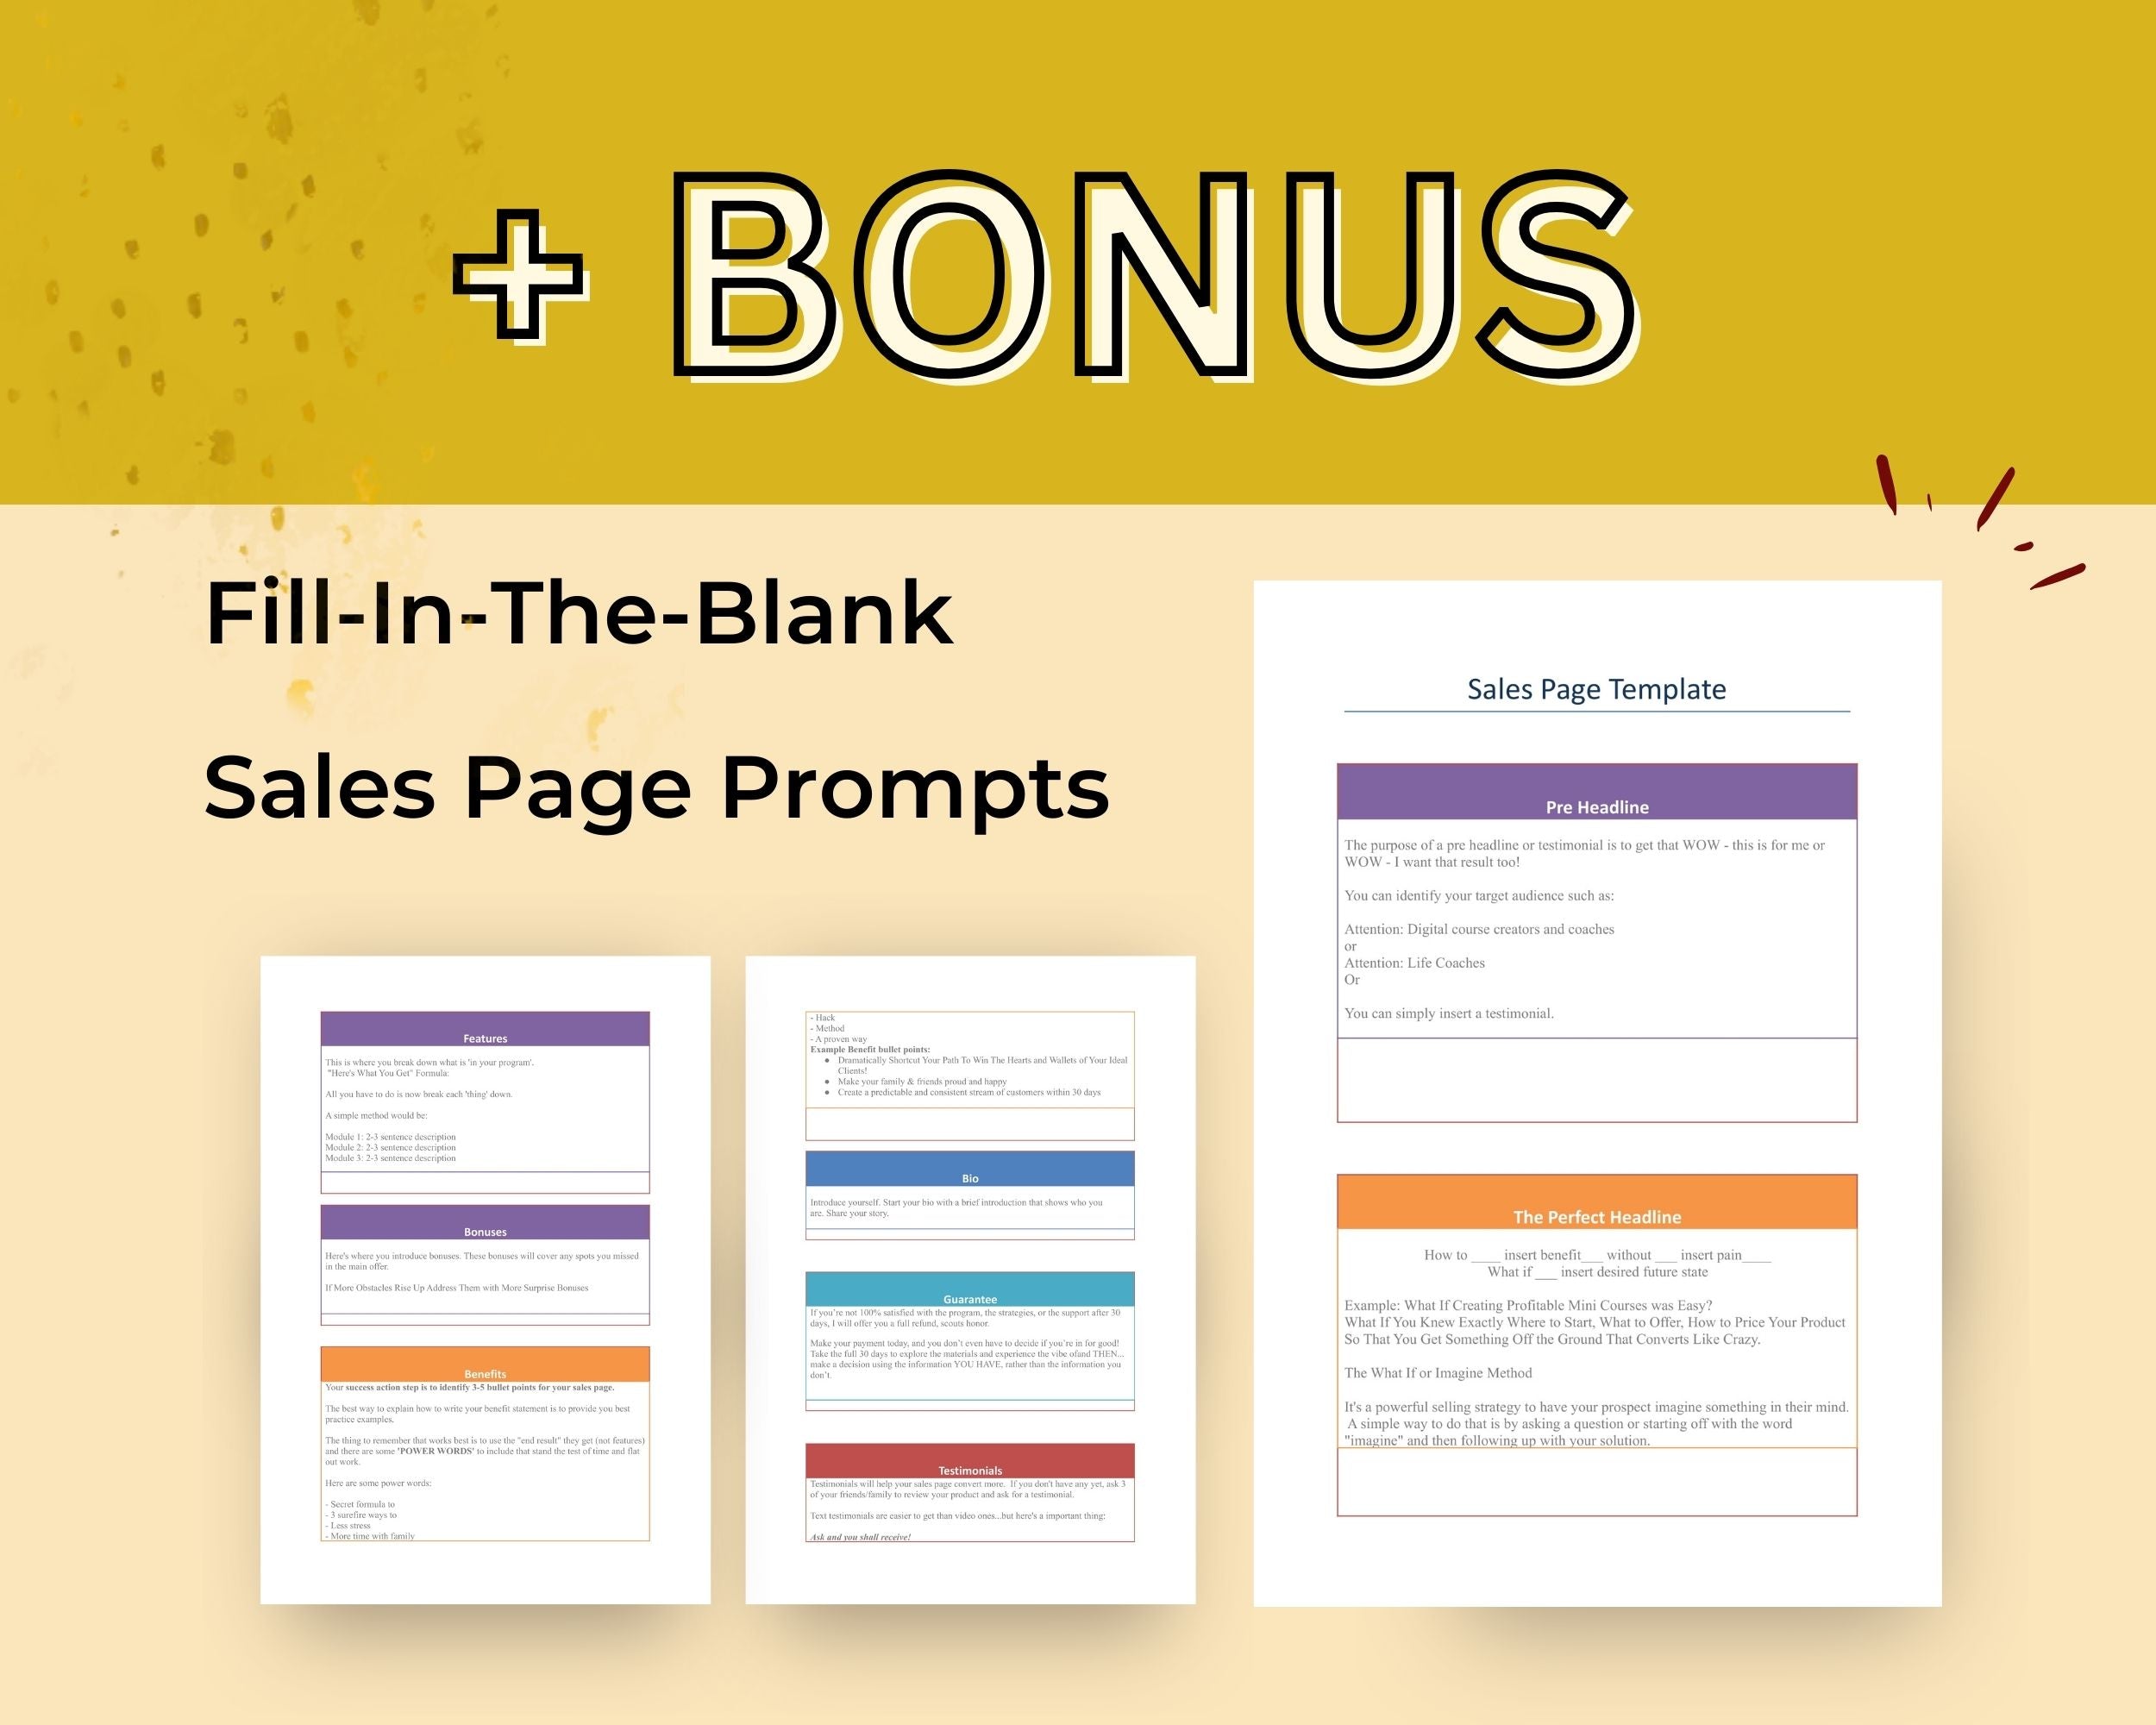 Halloween Sales Page Template